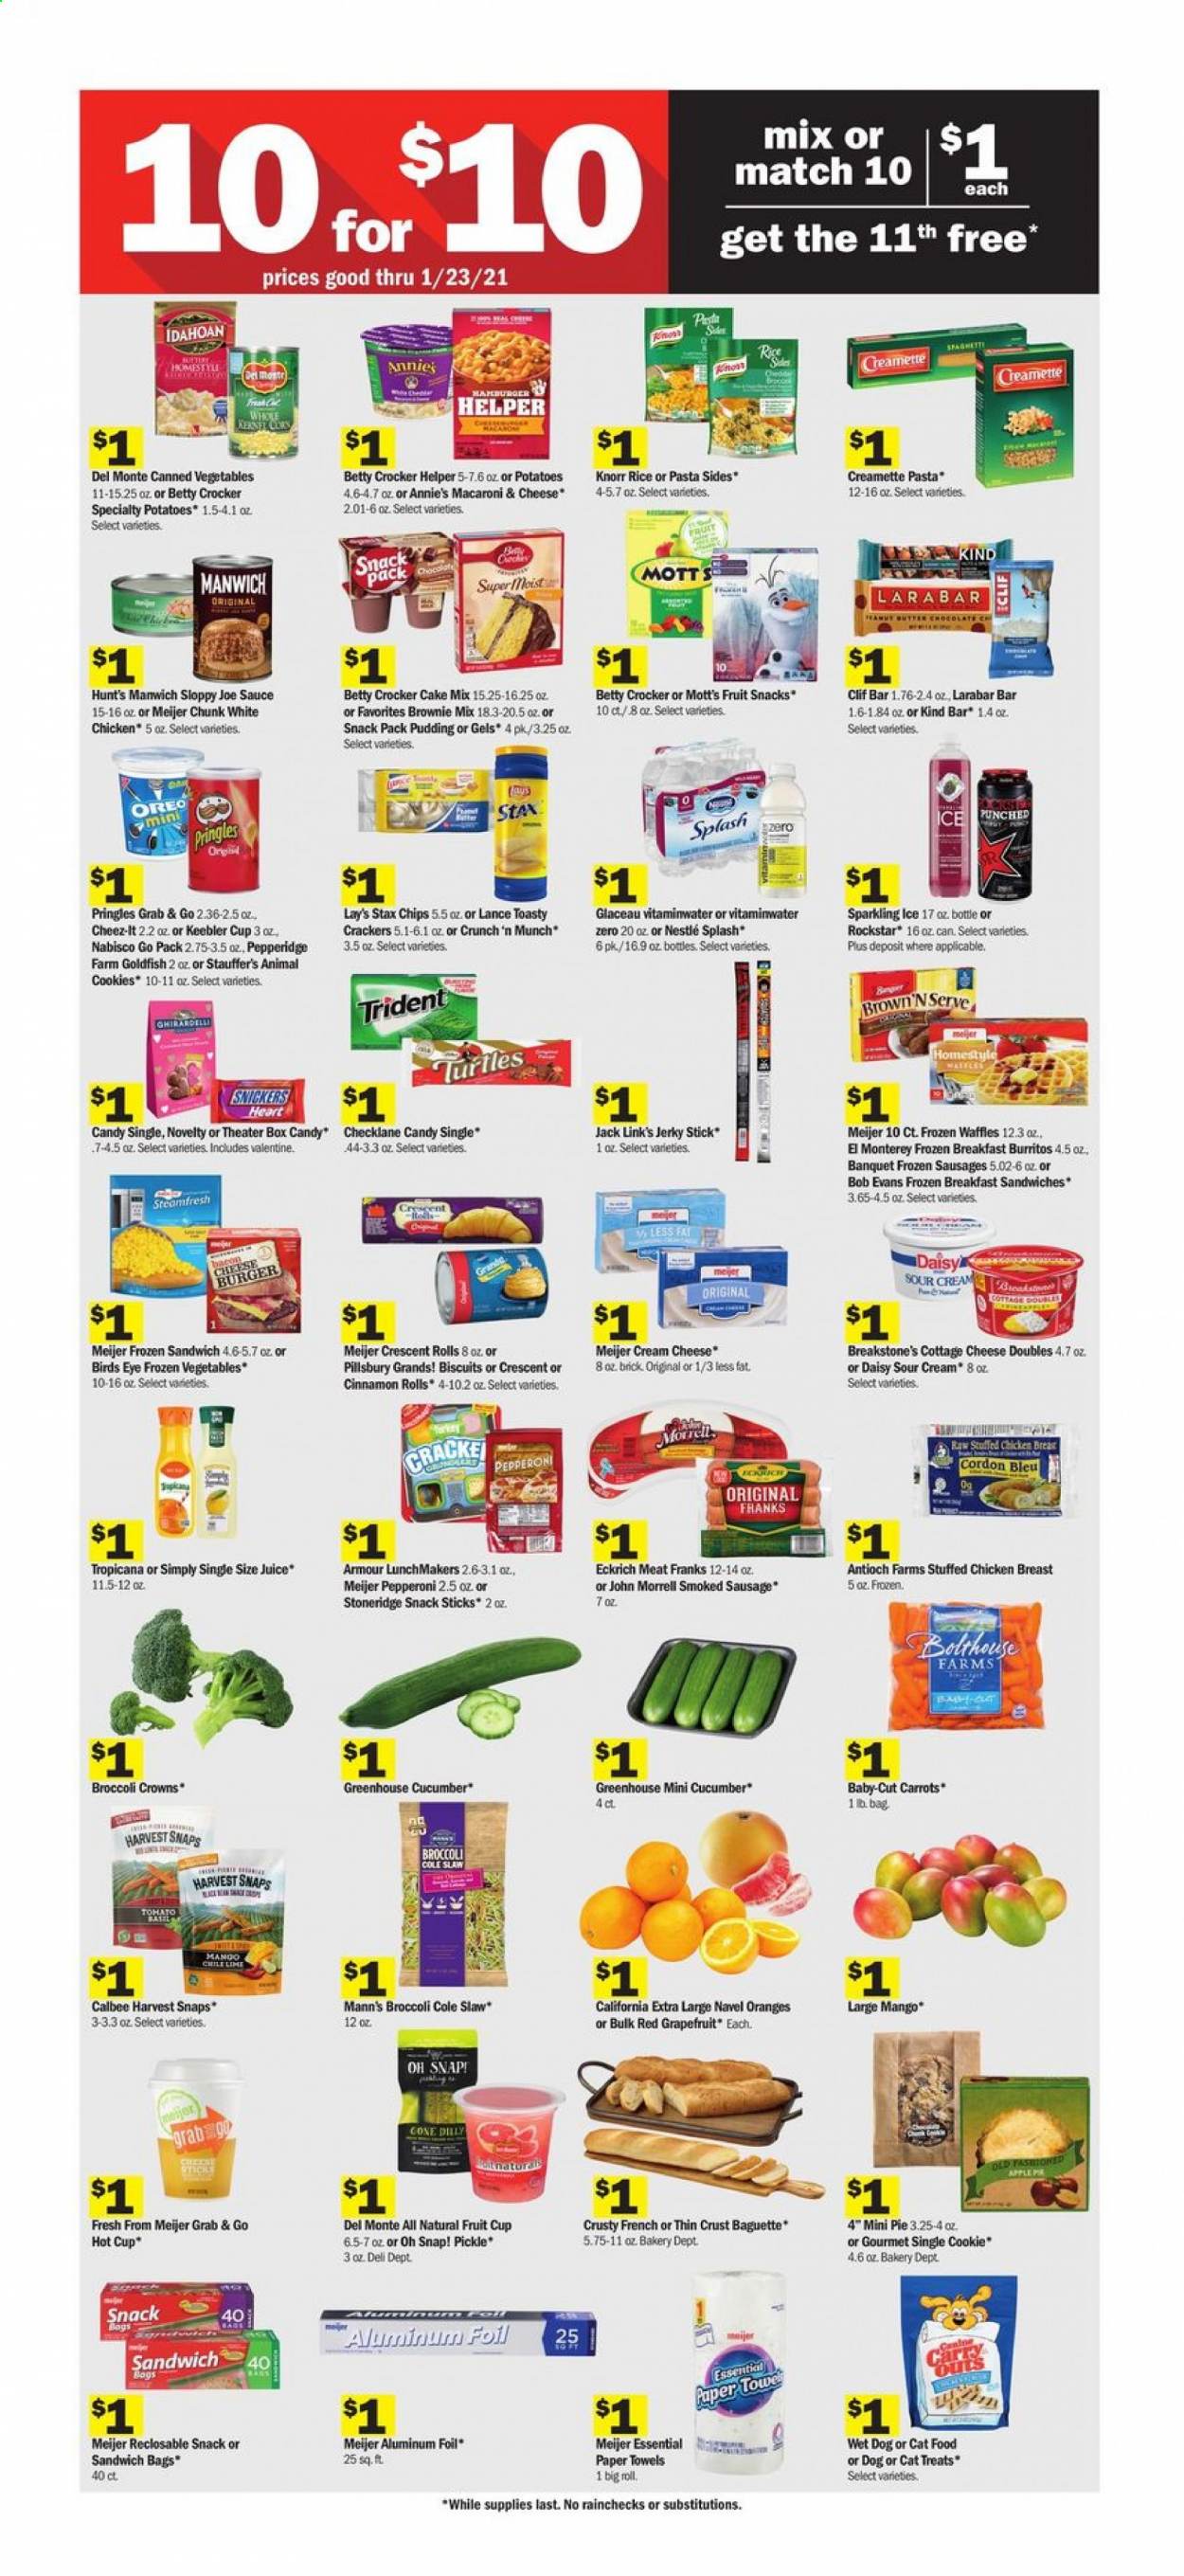 thumbnail - Meijer Flyer - 01/10/2021 - 01/16/2021 - Sales products - baguette, brownie mix, cake mix, cinnamon roll, crescent rolls, pie, waffles, oranges, cream cheese, macaroni & cheese, sandwich, hamburger, Knorr, sauce, Pillsbury, Bird's Eye, Annie's, pasta sides, Bob Evans, stuffed chicken, bacon, jerky, sausage, smoked sausage, pepperoni, cottage cheese, pudding, Oreo, sour cream, carrots, frozen vegetables, mango, cordon bleu, cookies, Nestlé, Snickers, crackers, biscuit, Trident, fruit snack, Ghirardelli, Keebler, Pringles, Lay’s, Goldfish, Cheez-It, Harvest Snaps, Jack Link's, cucumber, canned vegetables, Manwich, pasta, Creamette, juice, Mott's, Rockstar, chicken breasts, kitchen towels, paper towels, aluminium foil, animal food, cat food, Apple. Page 2.